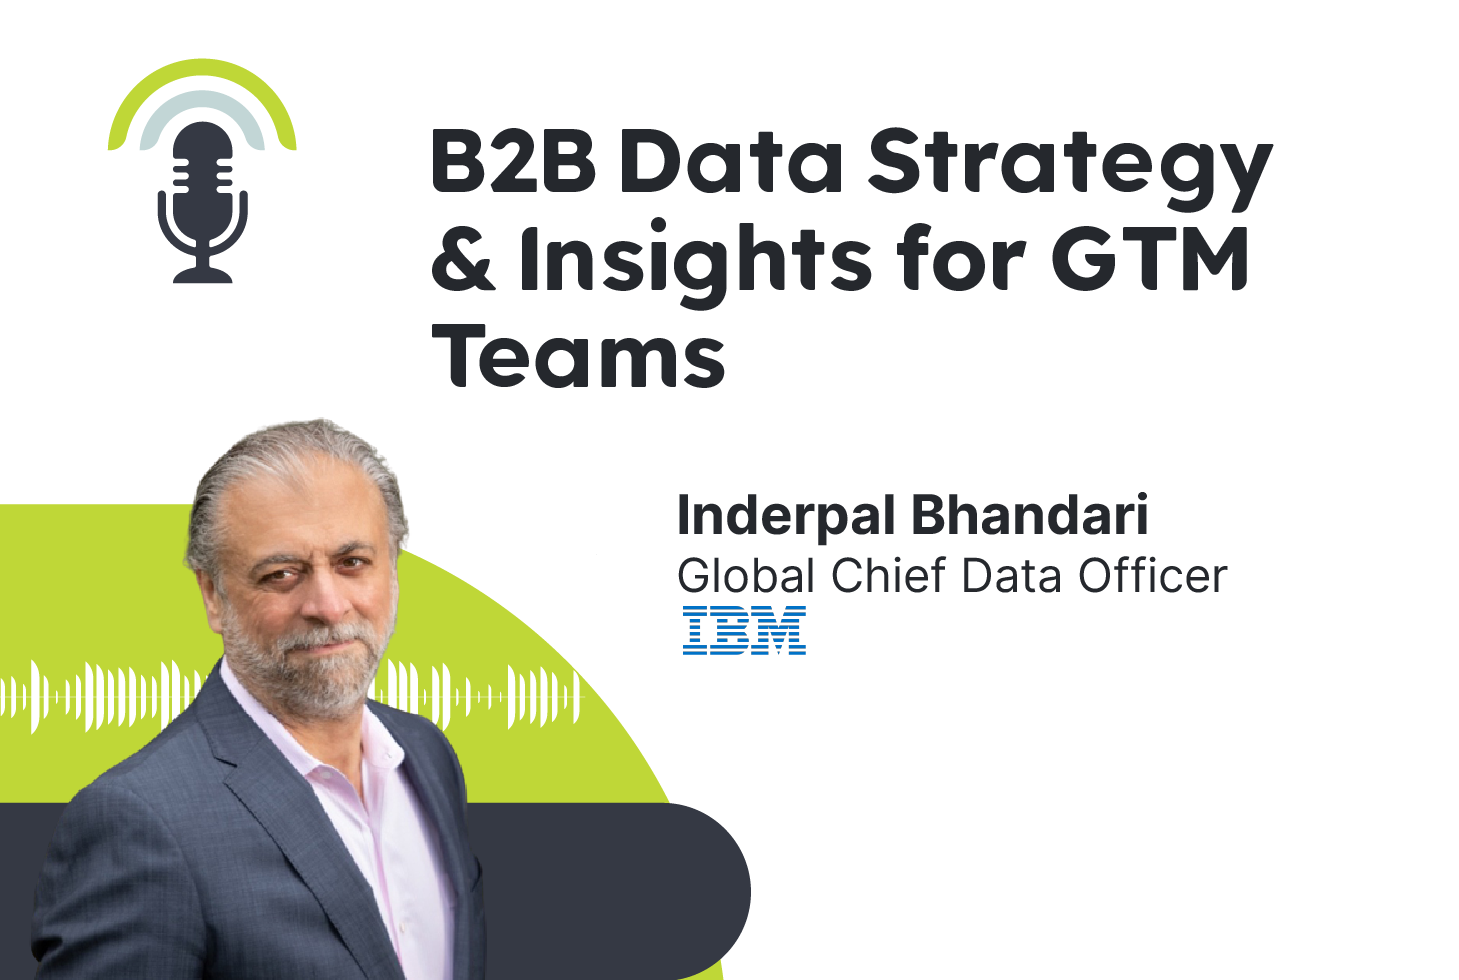 Insights for GTM teams